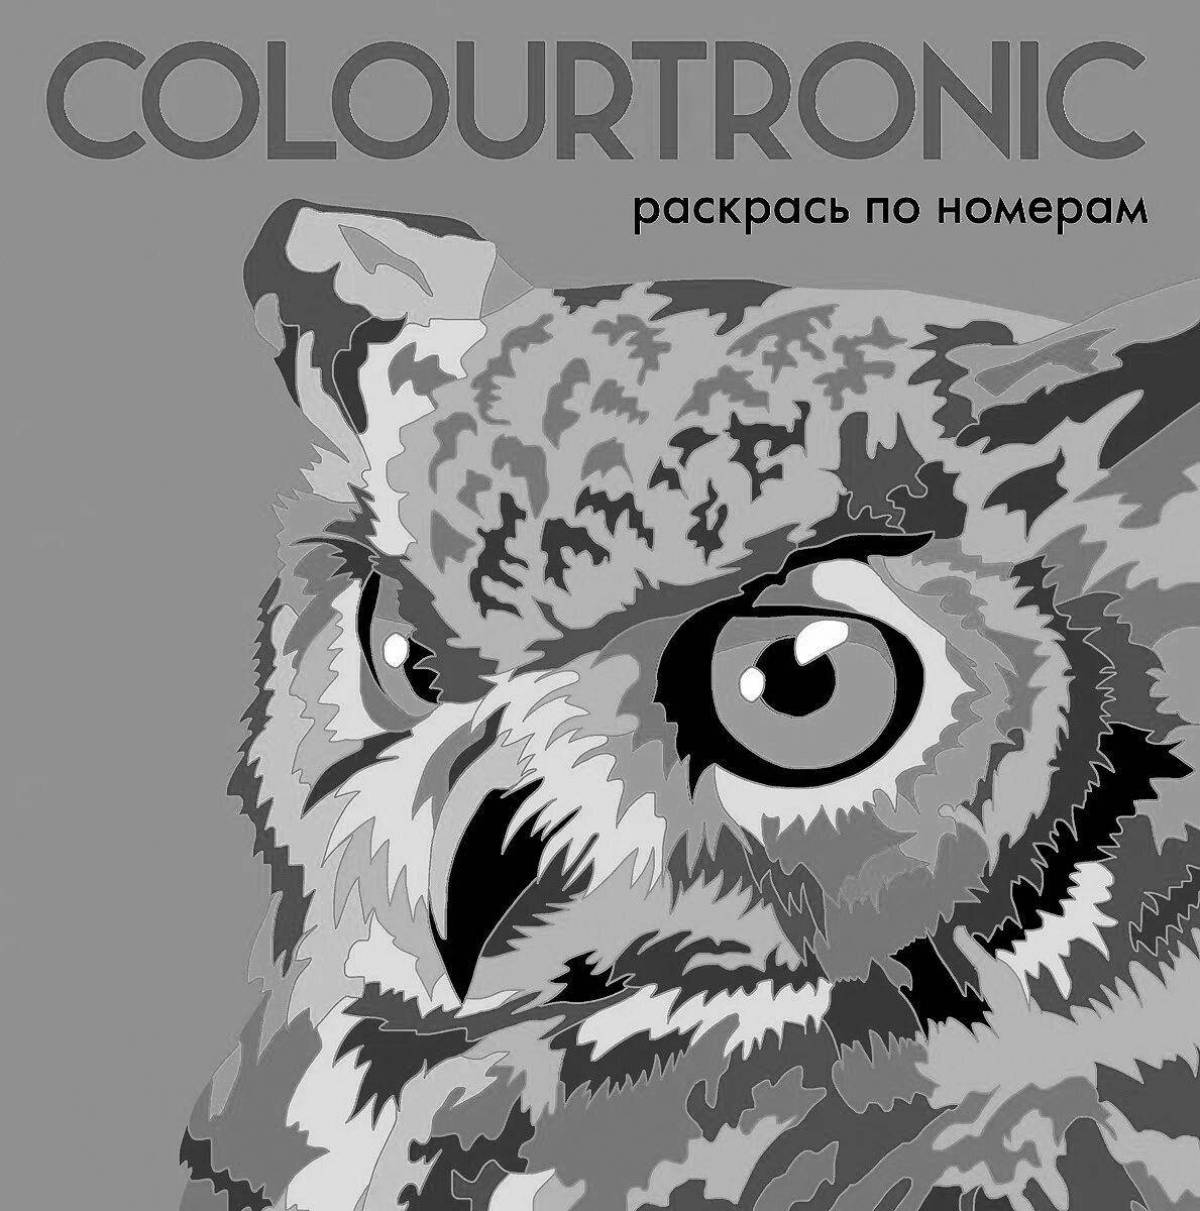 Color-frenzy colortronic coloring page